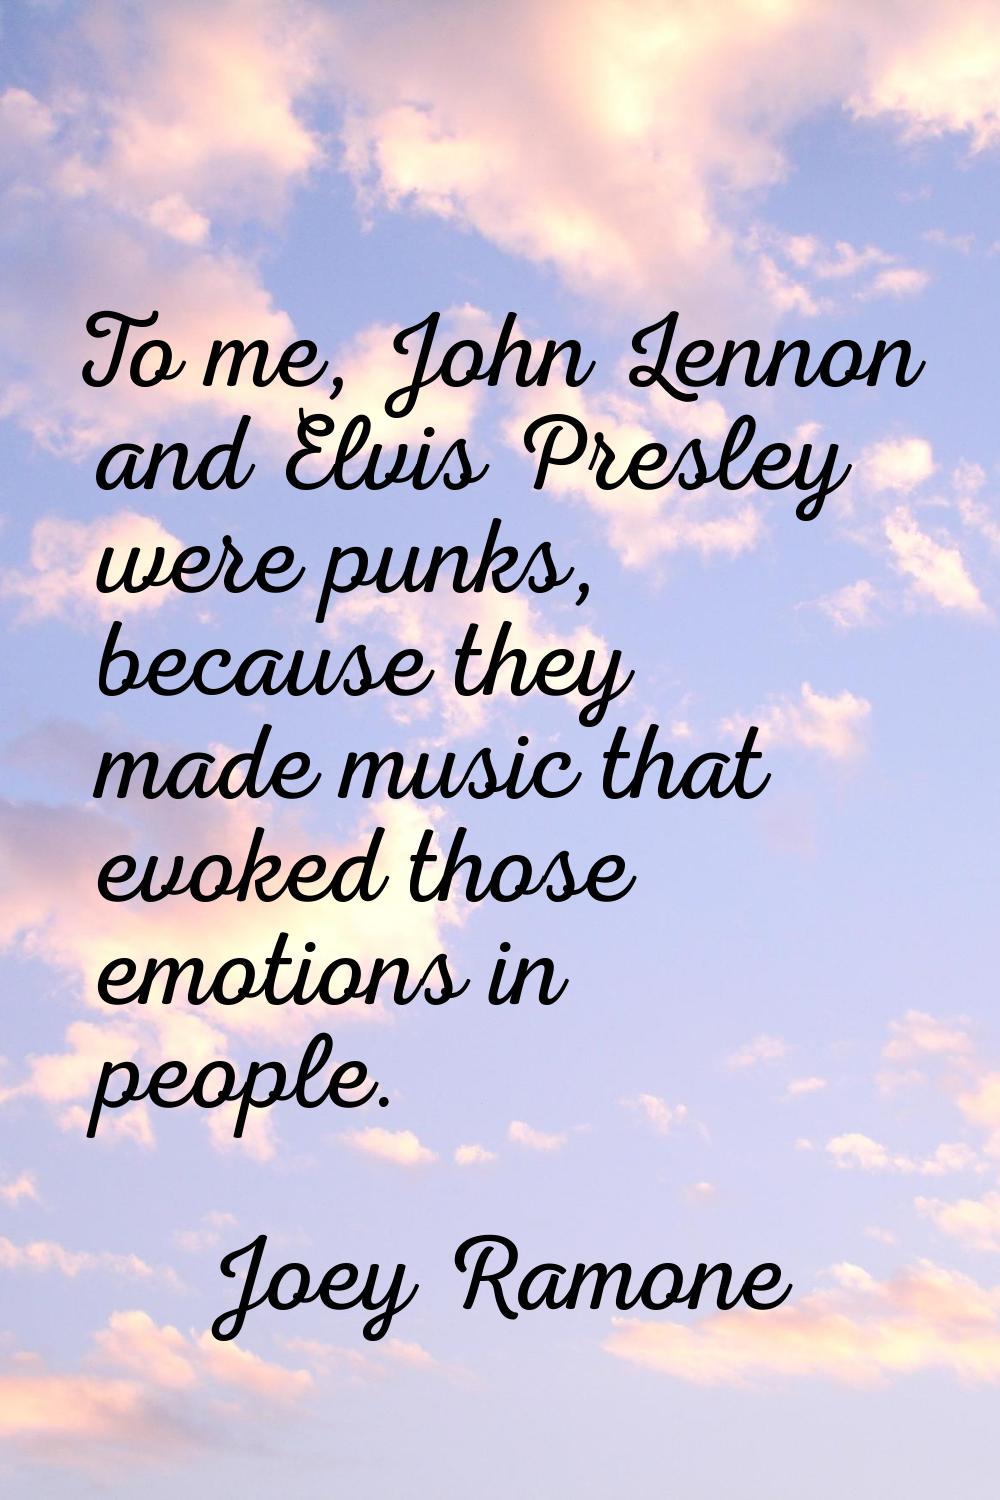 To me, John Lennon and Elvis Presley were punks, because they made music that evoked those emotions